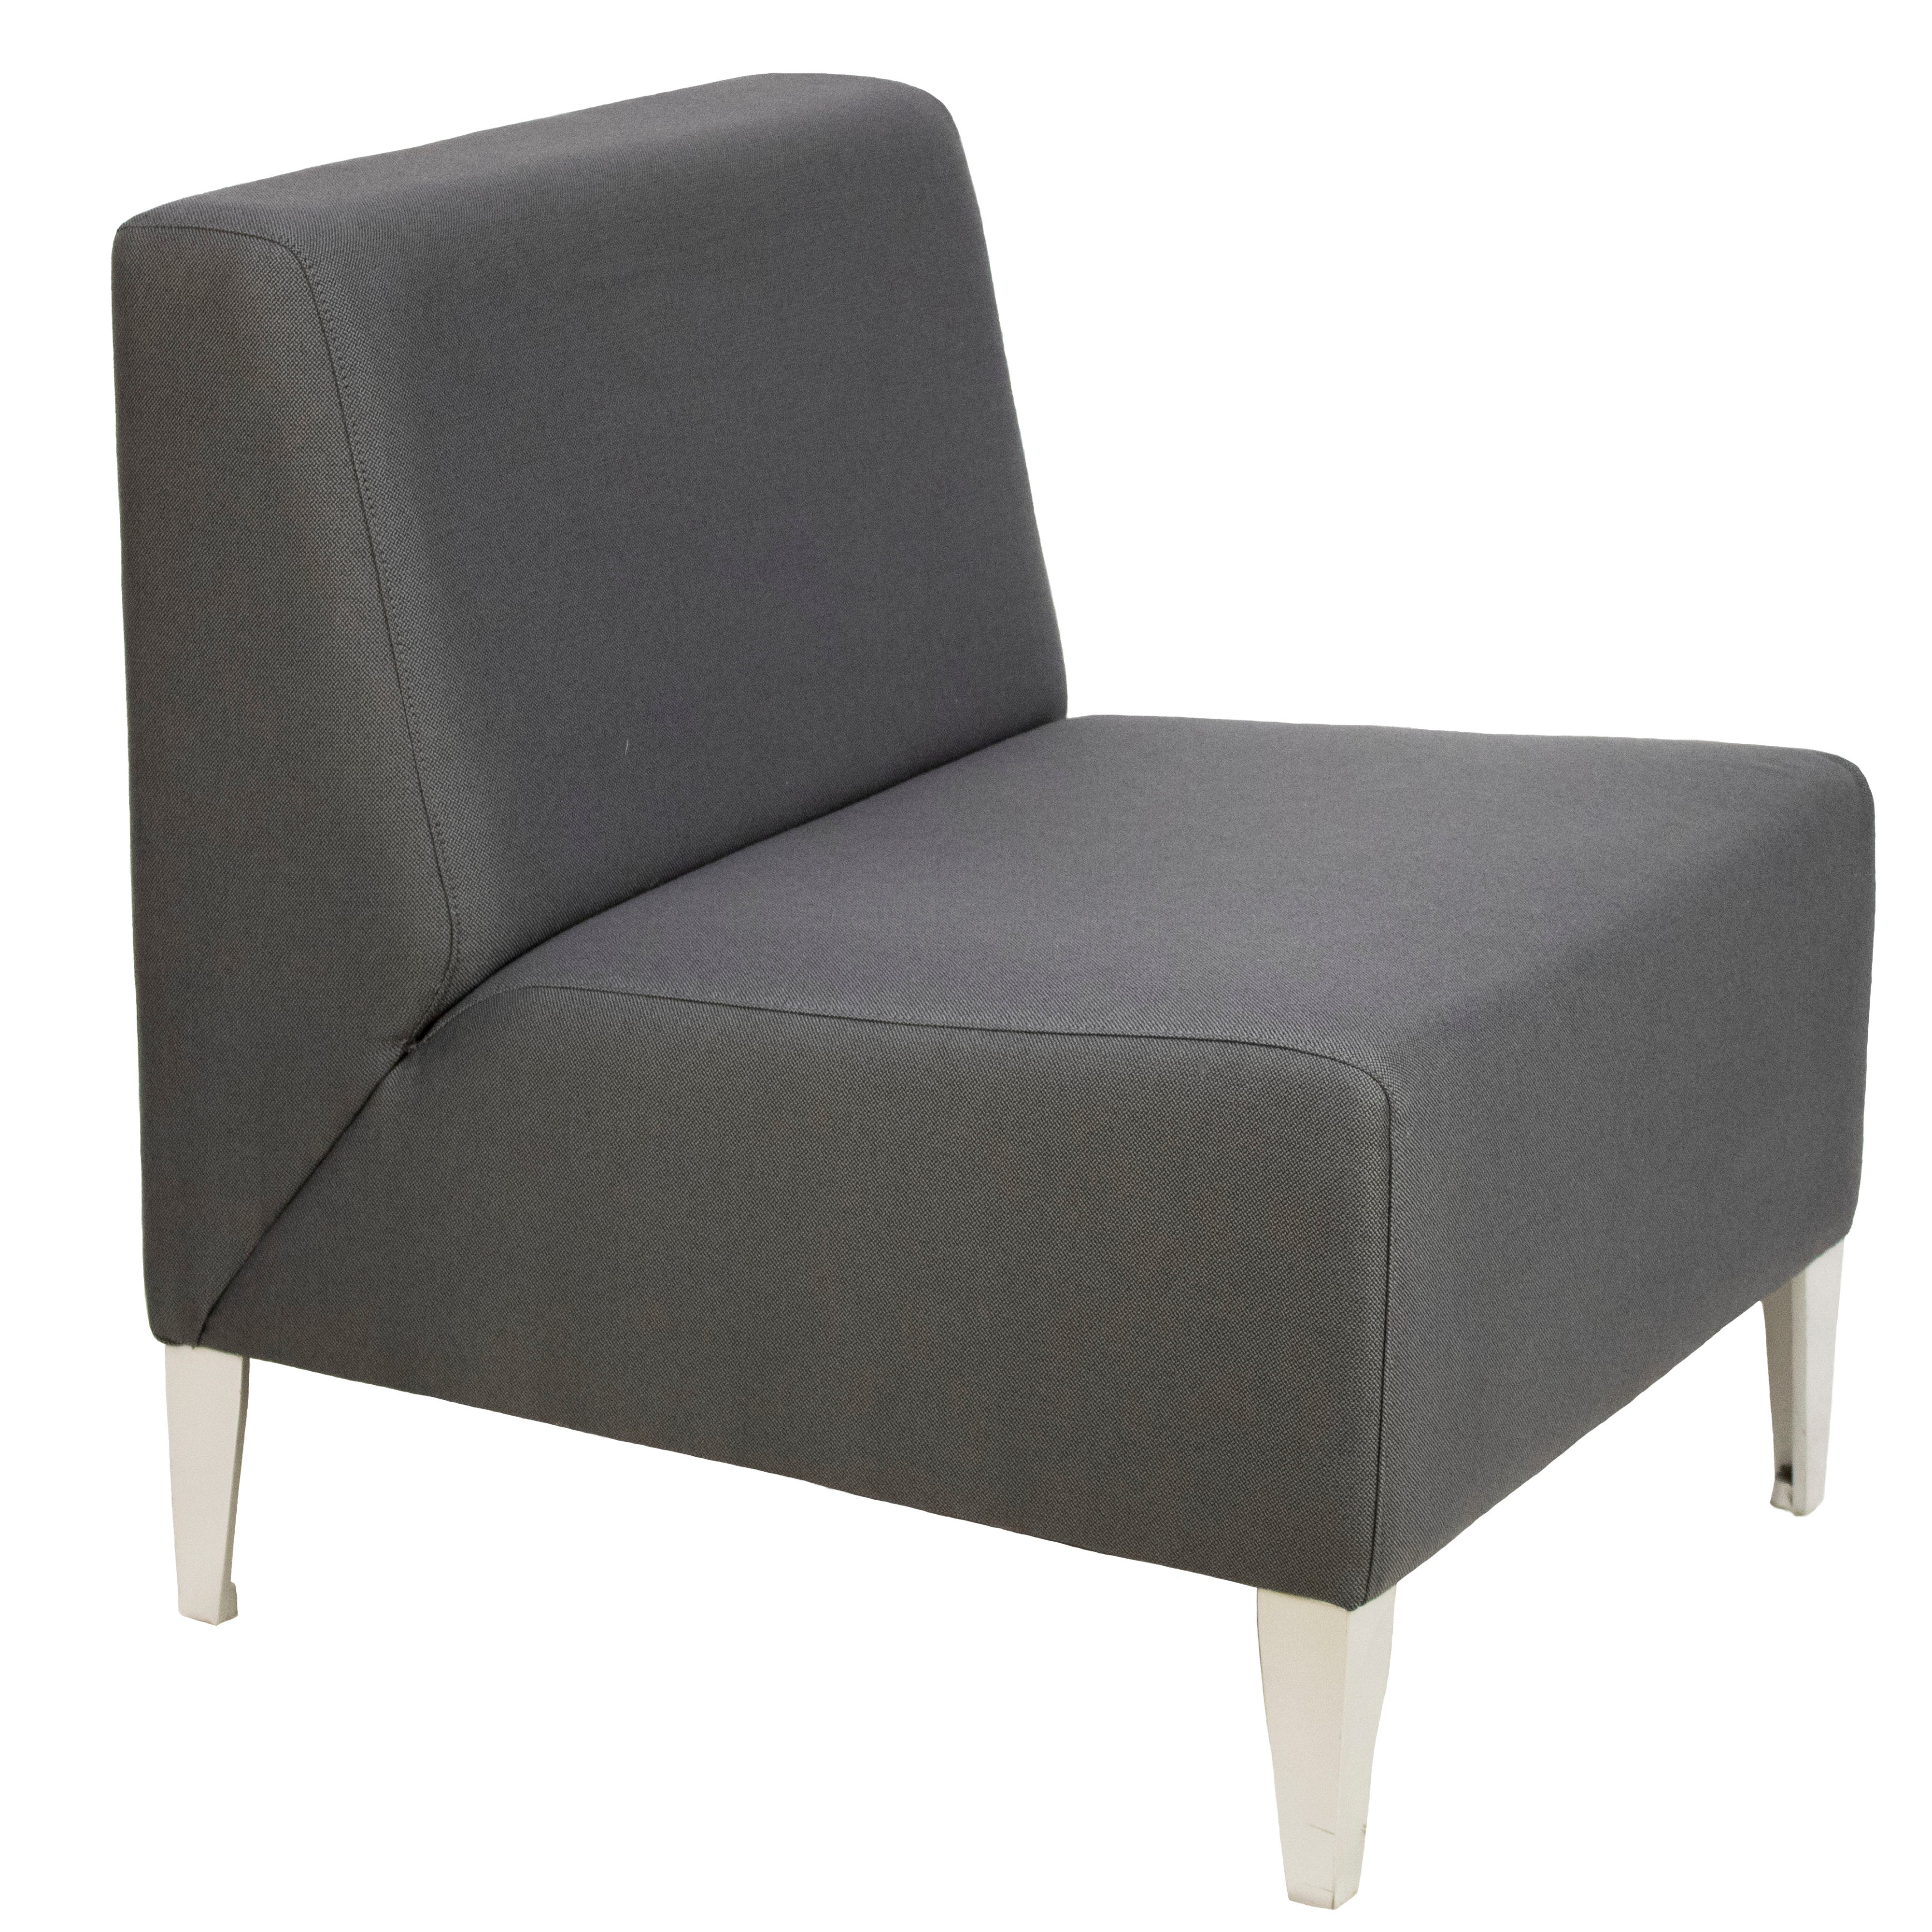 Coalesse Bix Lounge Chair, Grey - Preowned